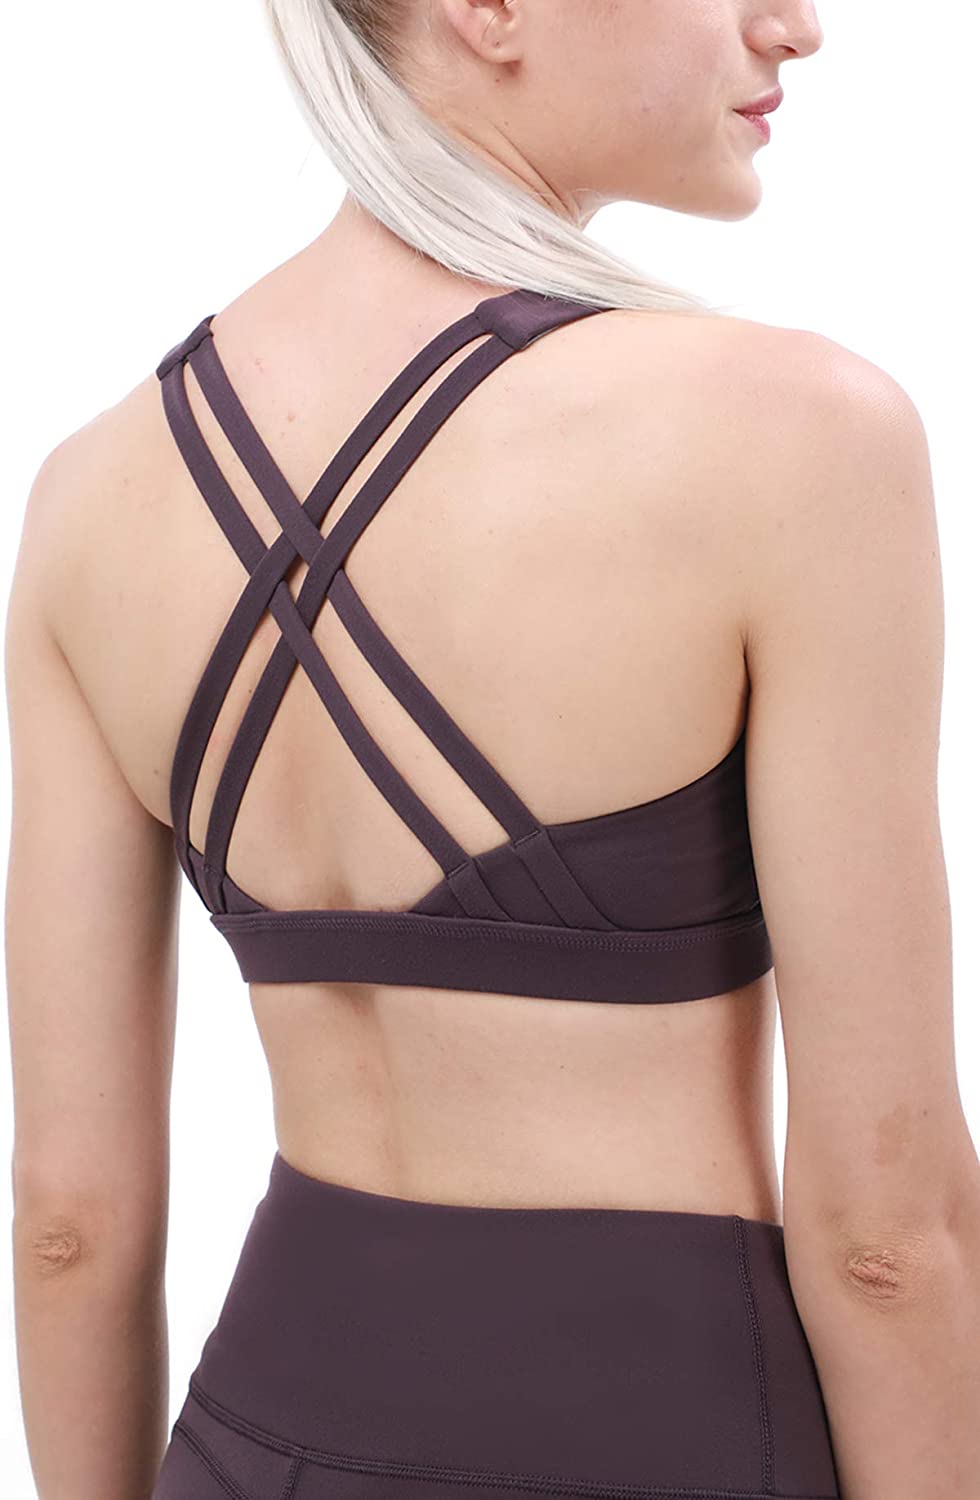 Price:$15.99 Yoga Cross Strappy Sports Bra for Women Scoop Neck Soft Cute Workout Fitness Gym Bra at Amazon Women’s Clothing store